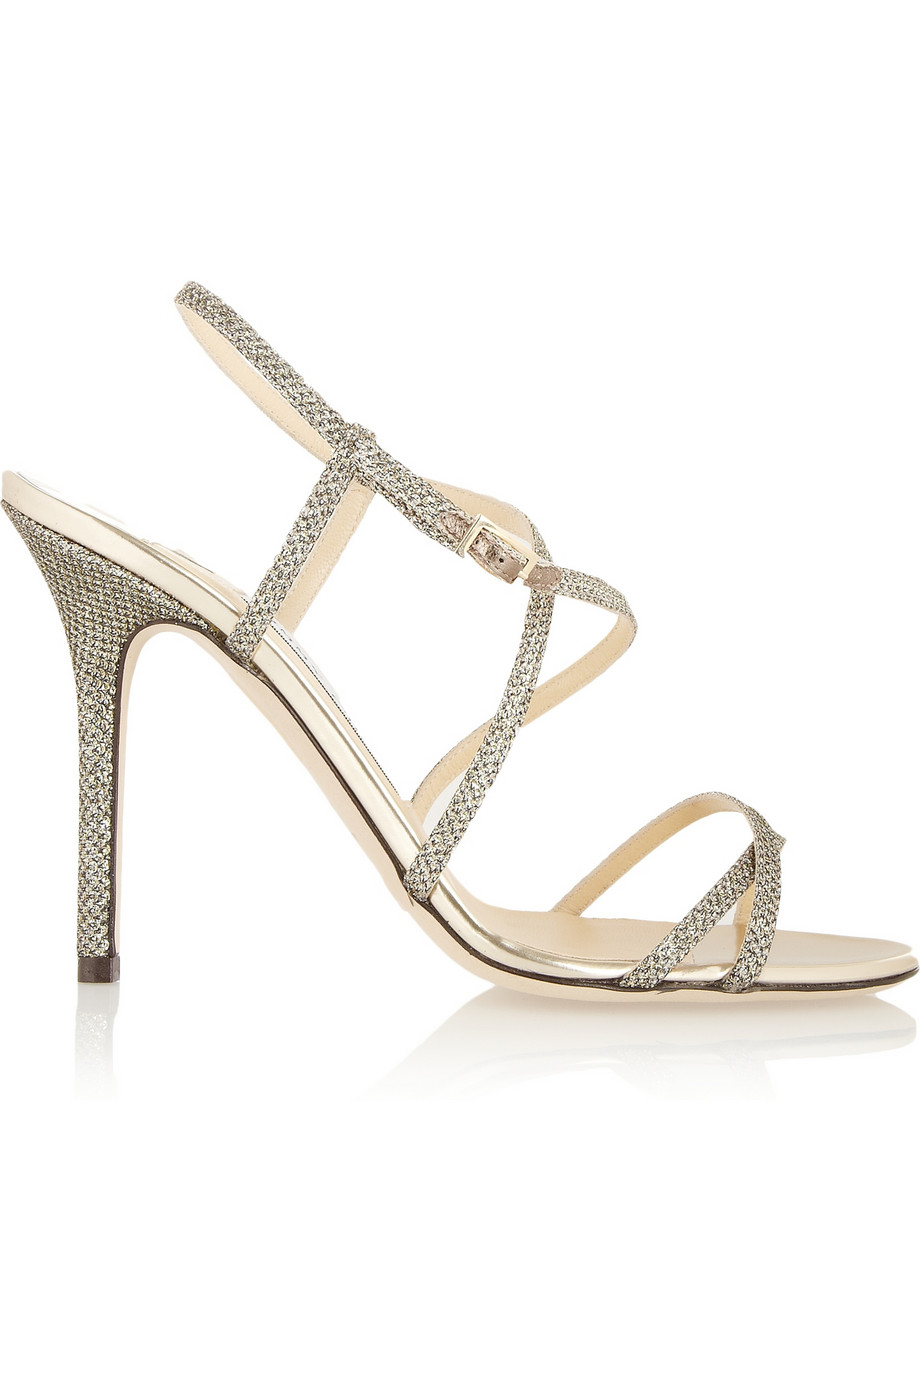 Lyst - Jimmy choo Issey Textured-Lamé Sandals in Metallic